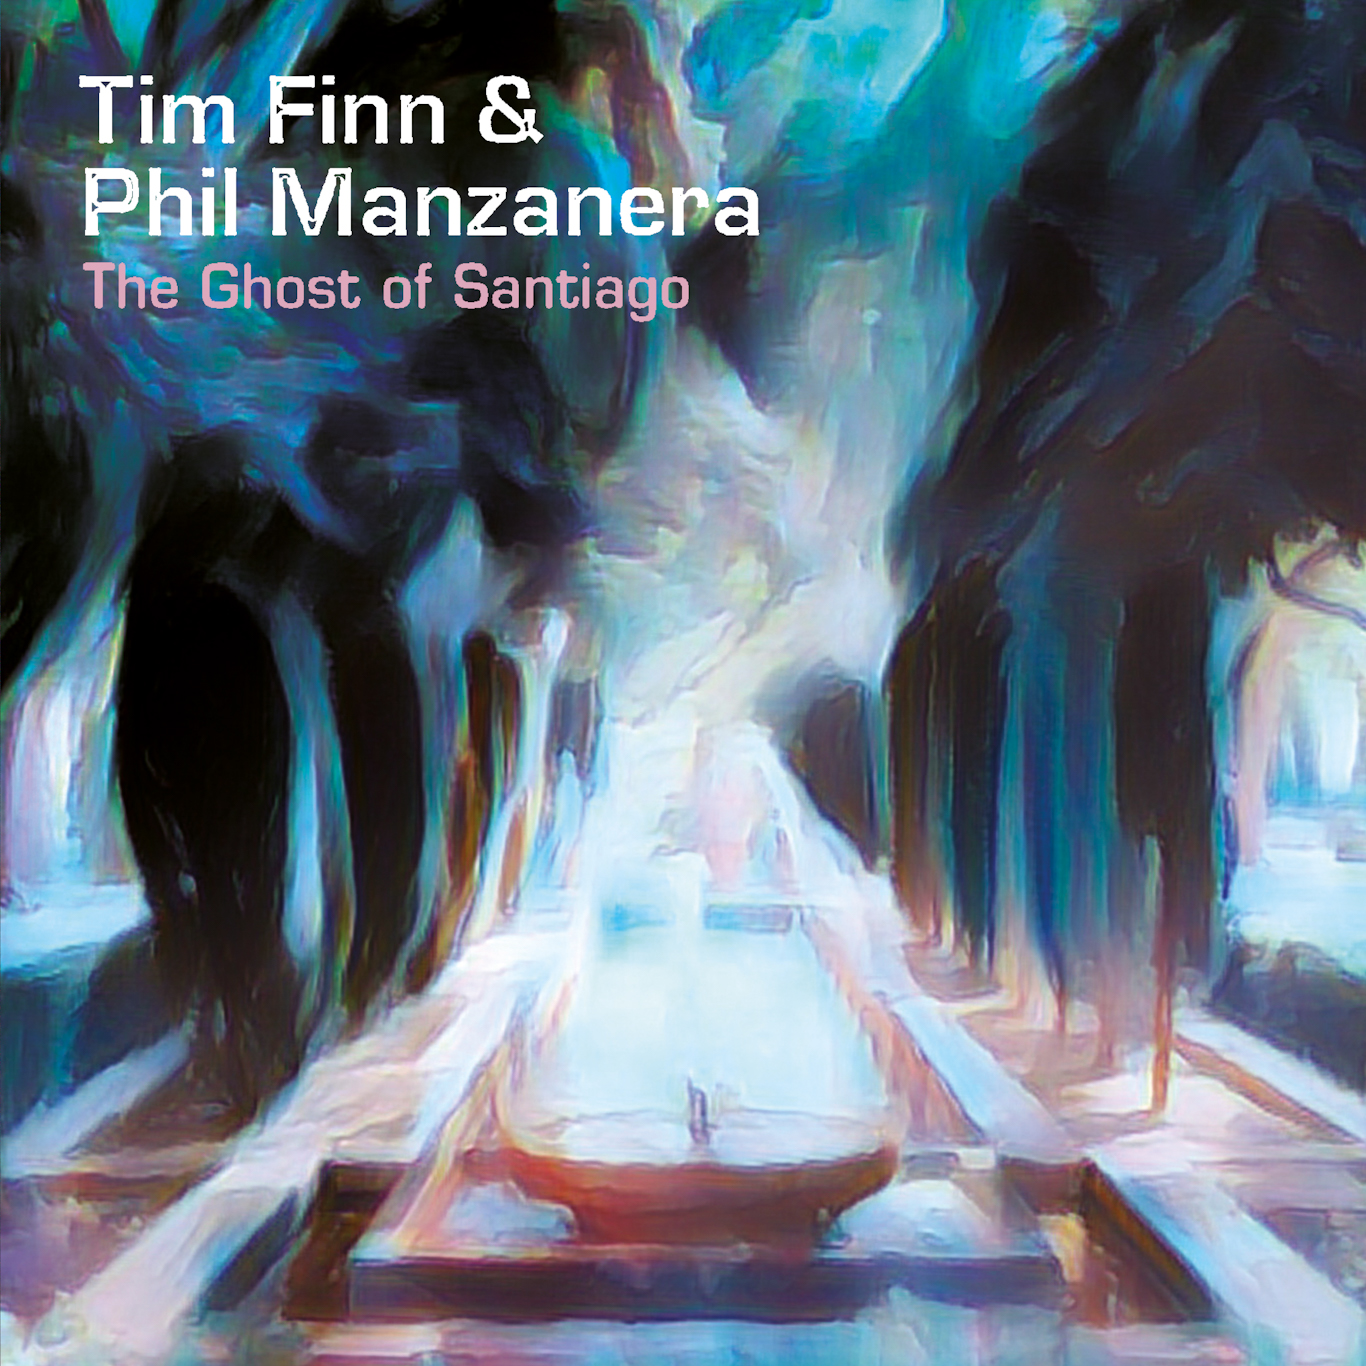 Tim Finn & Phil Manzanera announce second collaboration album: 'The Ghost Of Santiago' - out 29 July 